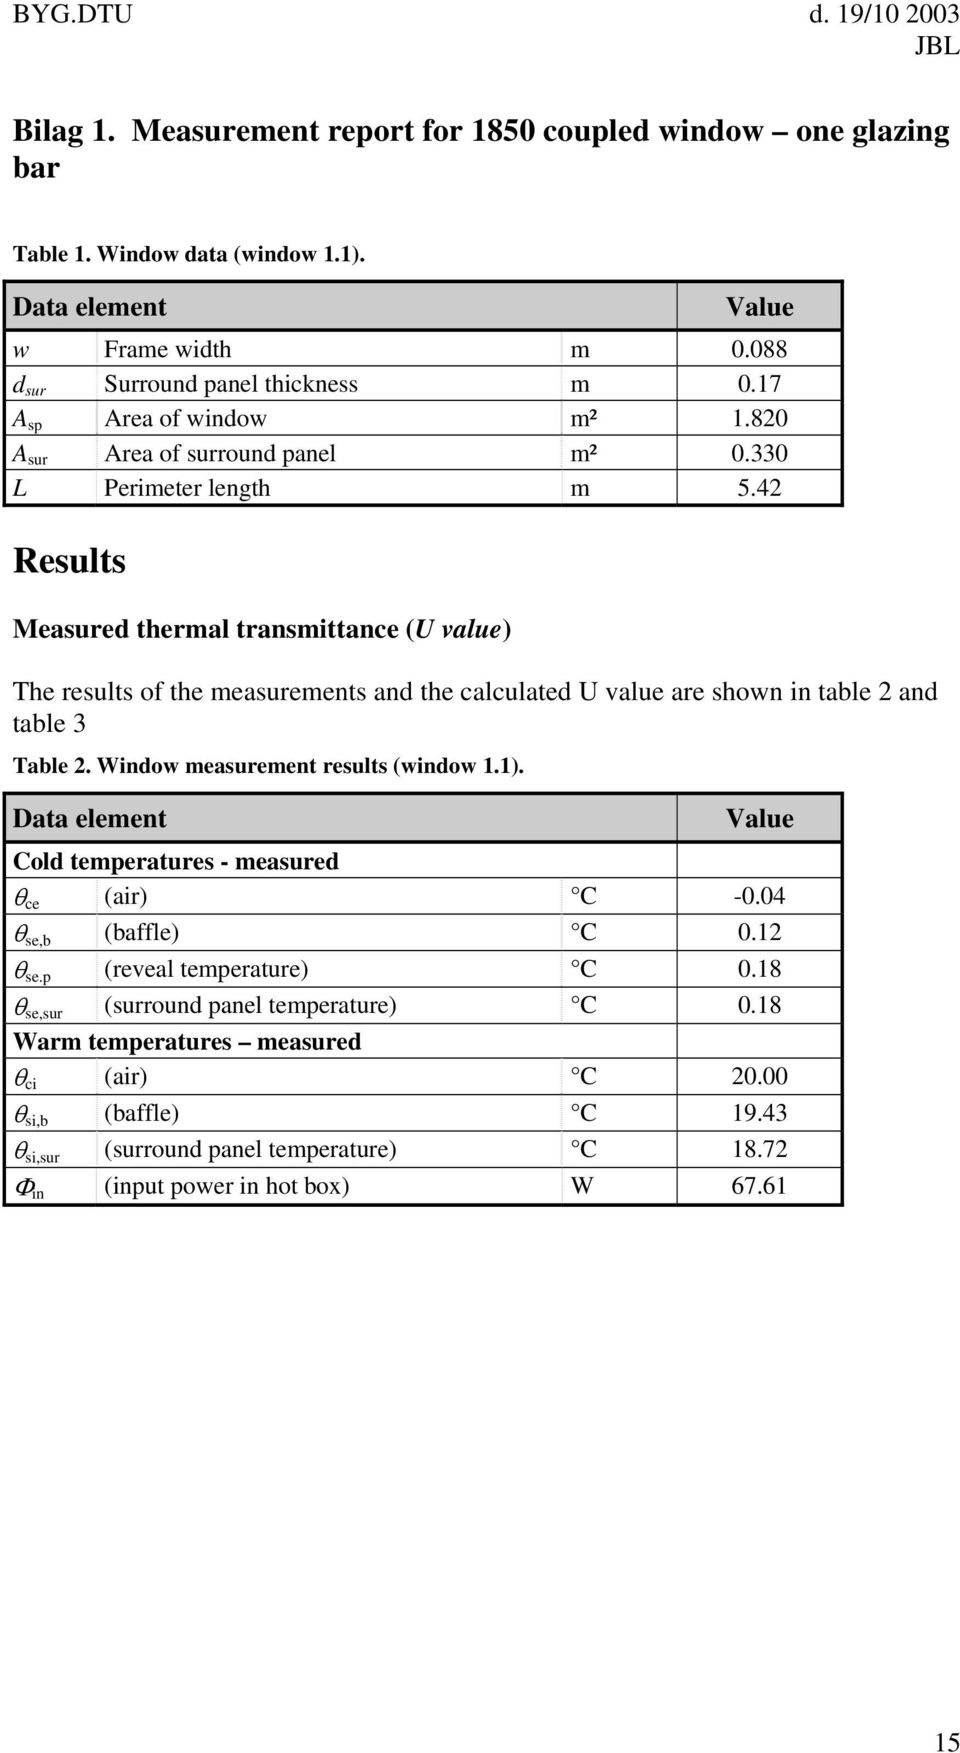 42 Results Measured thermal transmittance (U value) The results of the measurements and the calculated U value are shown in table 2 and table 3 Table 2. Window measurement results (window 1.1).